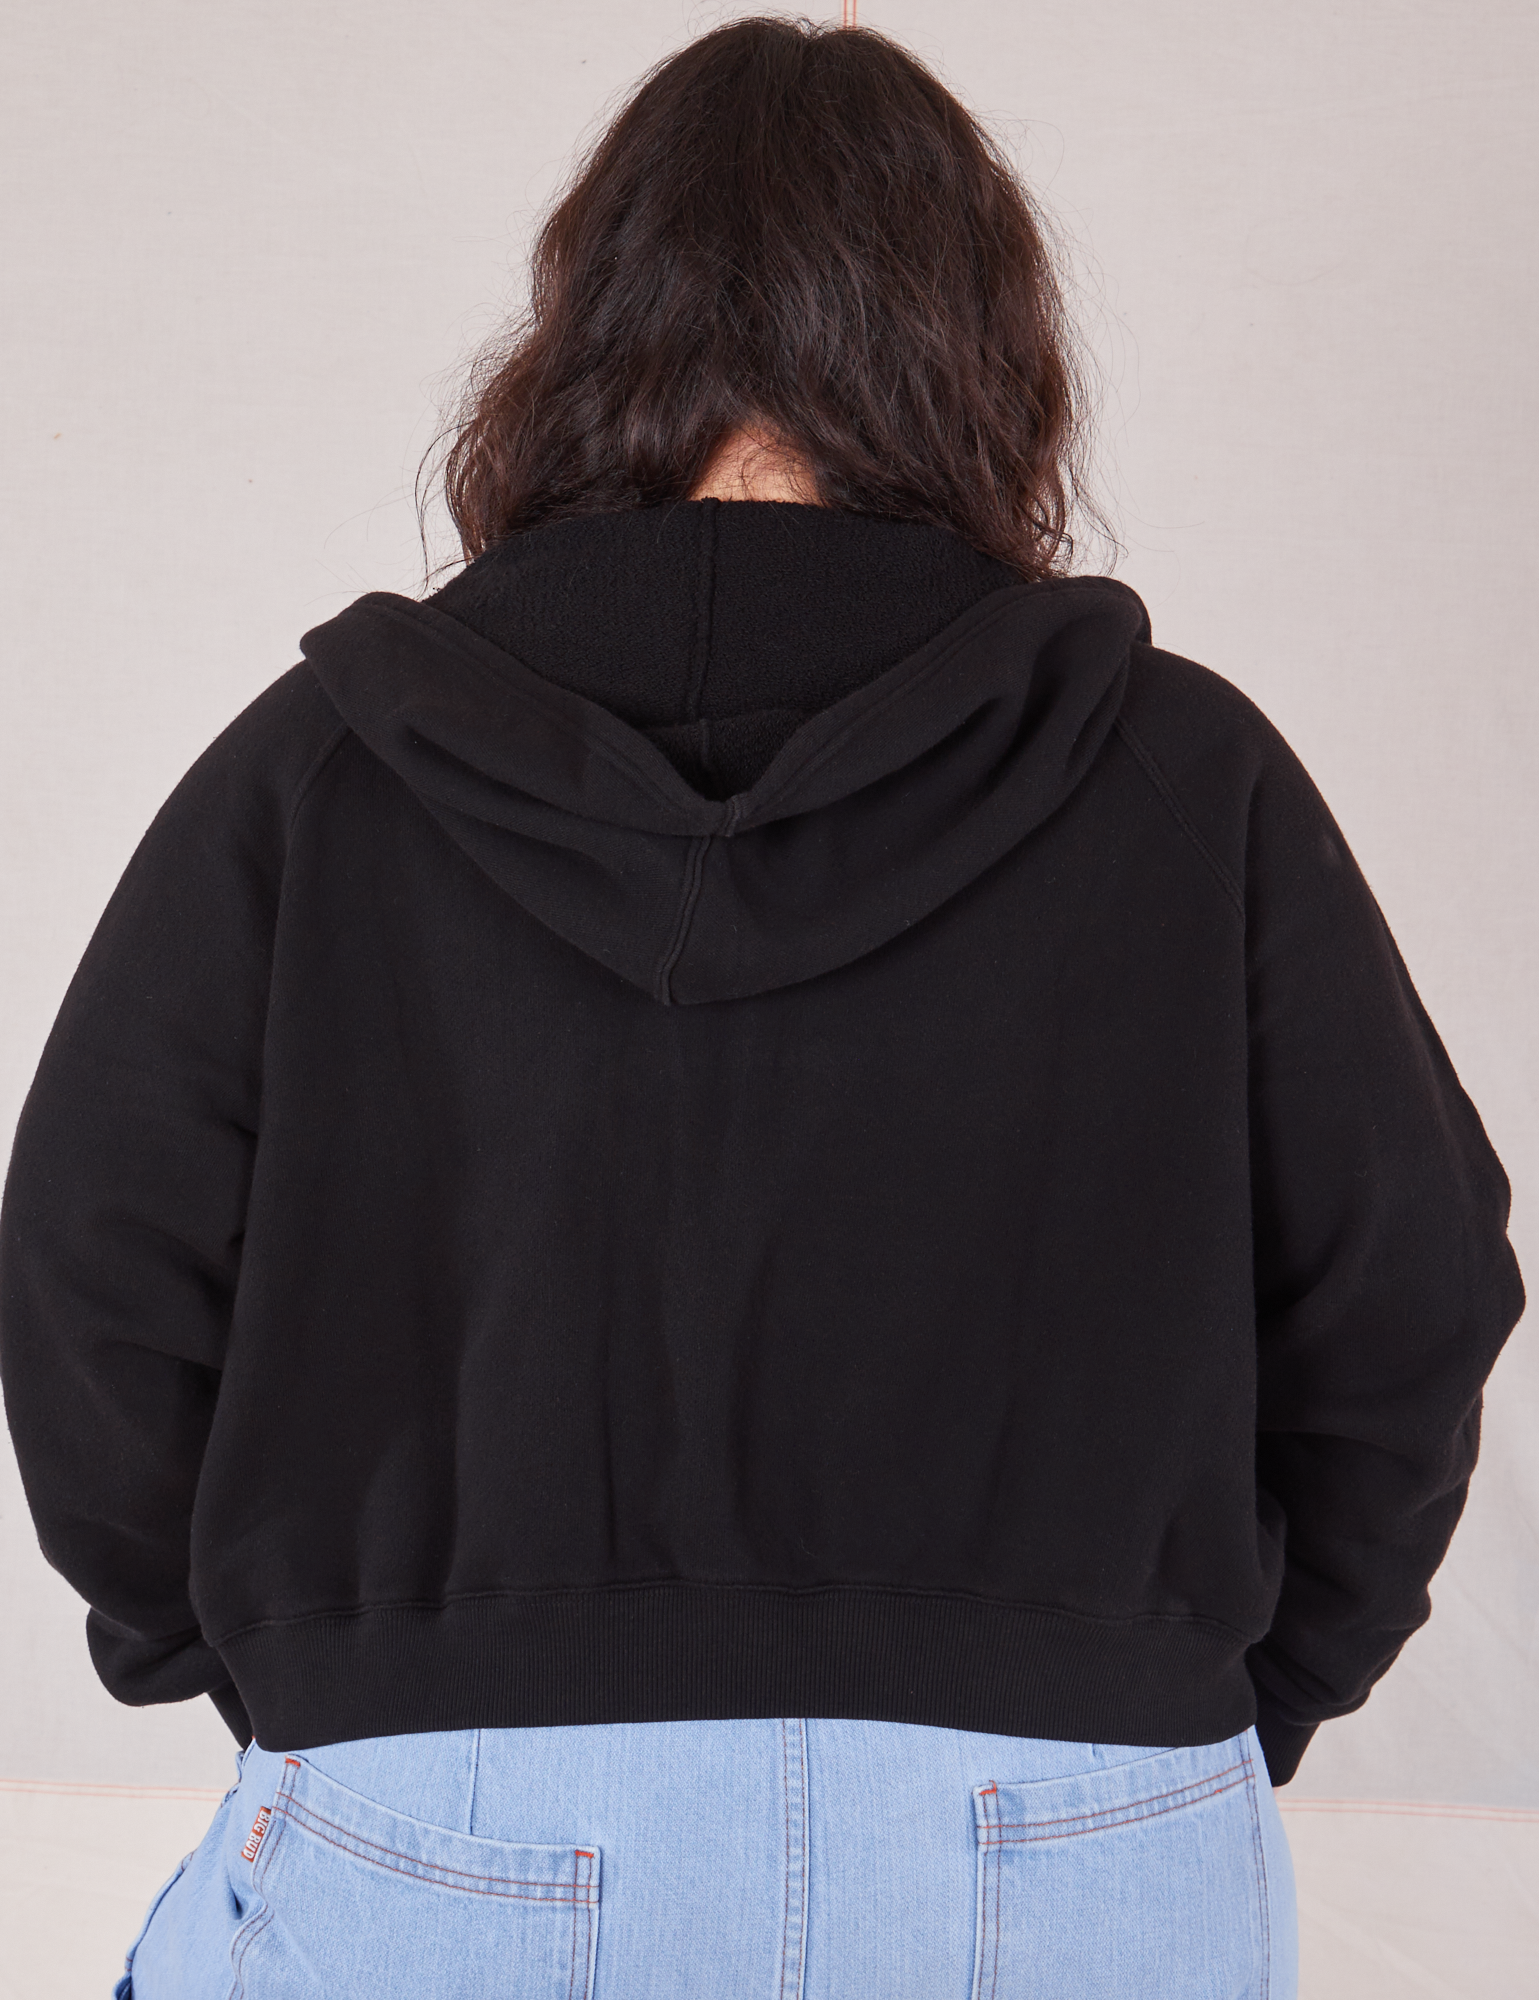 Cropped Zip Hoodie in Basic Black back view on Ashley